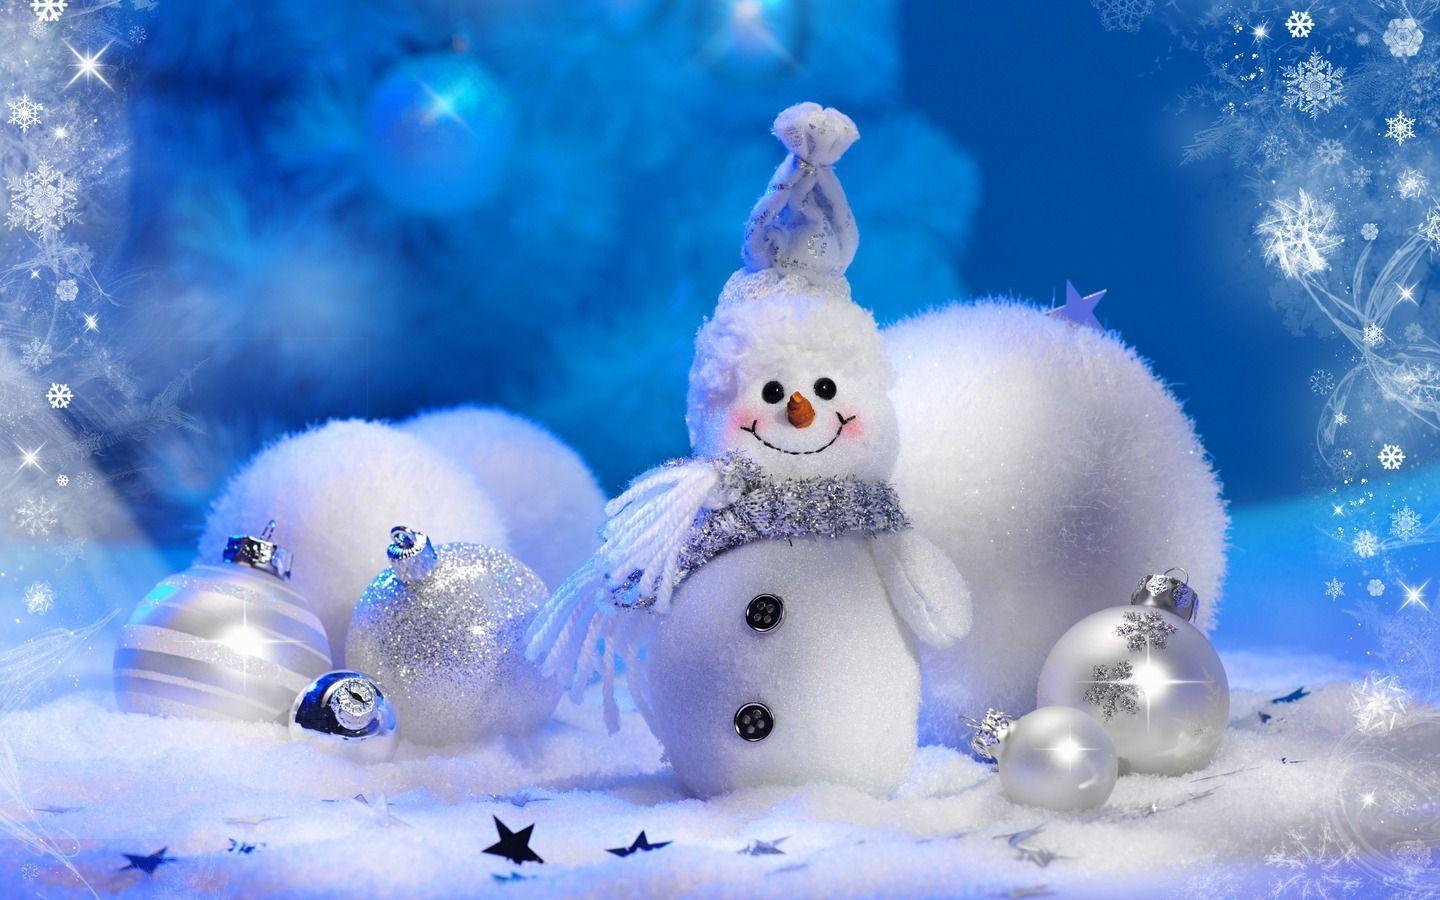 HD Christmas Wallpaper For 2014 “Best Collection Of Christmas